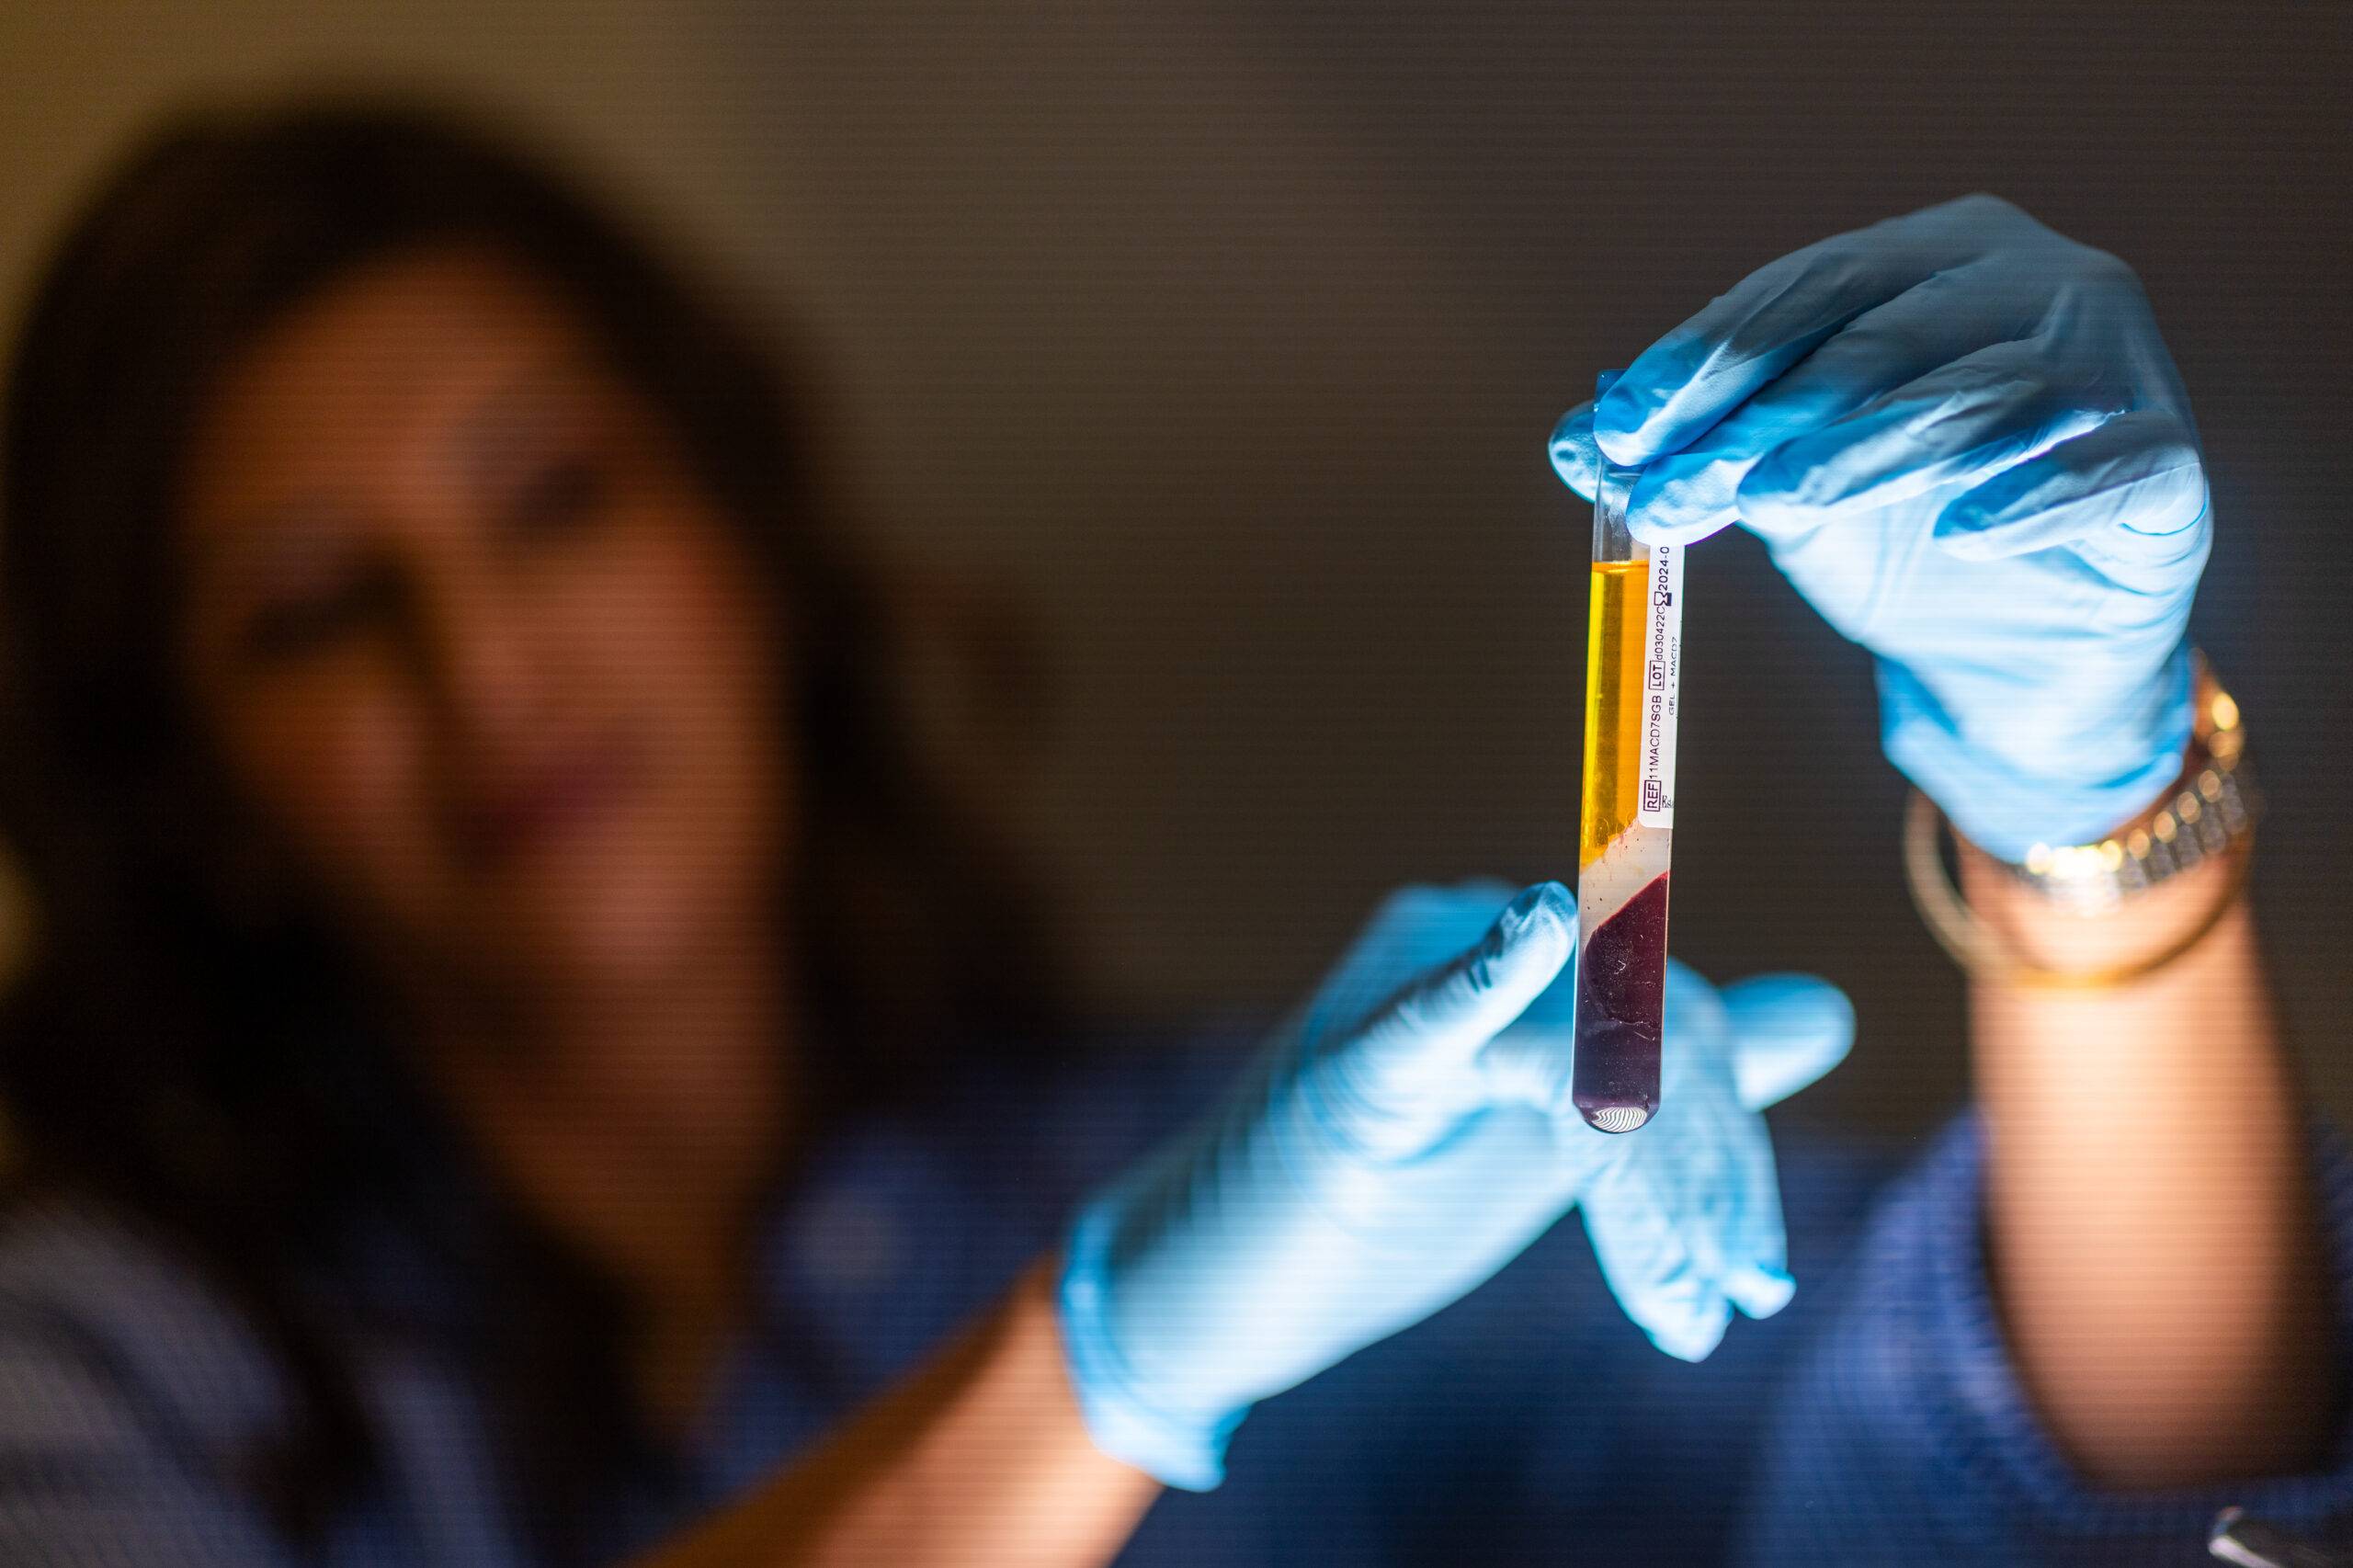 A female scientist in a lab coat examines a test tube containing a yellow substance, possibly skinboosters, with her focus concentrated on the tube, while slightly blurred in the background.